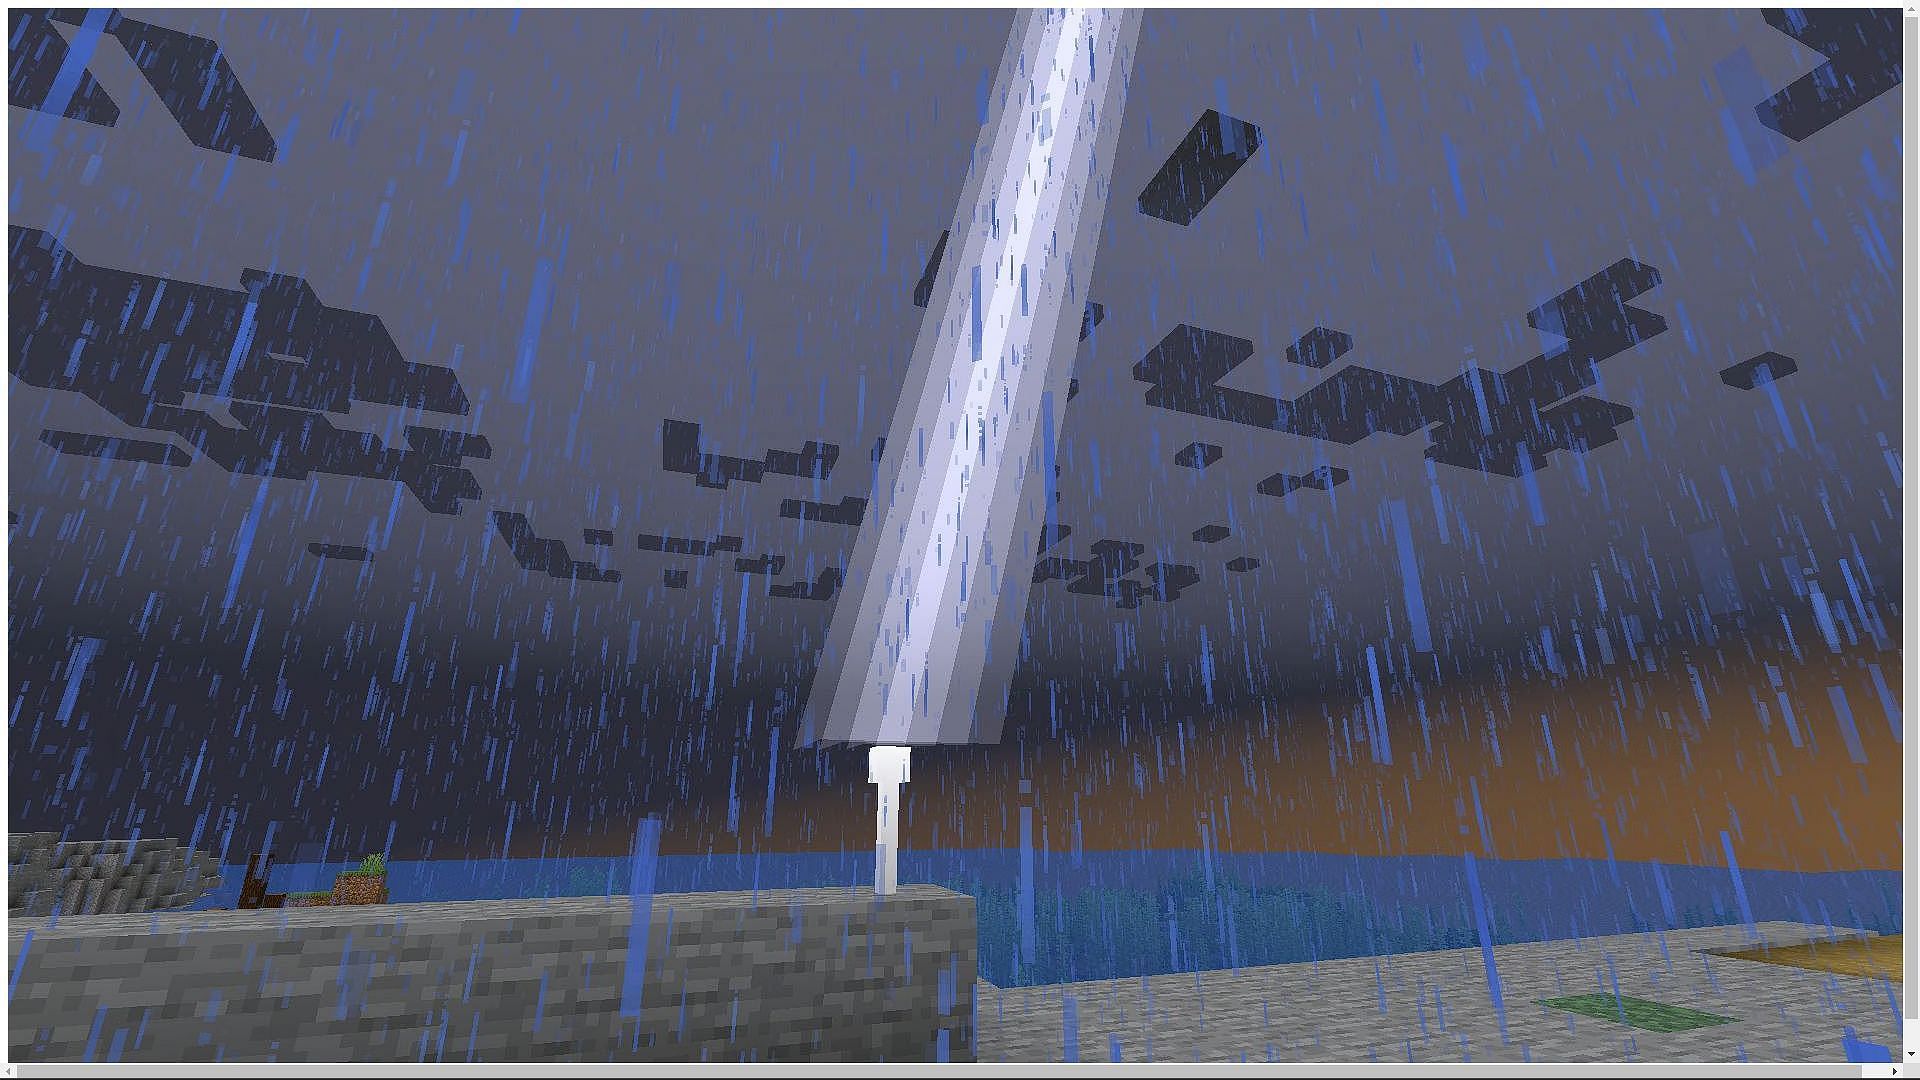 Lightning rods can help players displace lightning strikes in Minecraft (Image via Mojang)